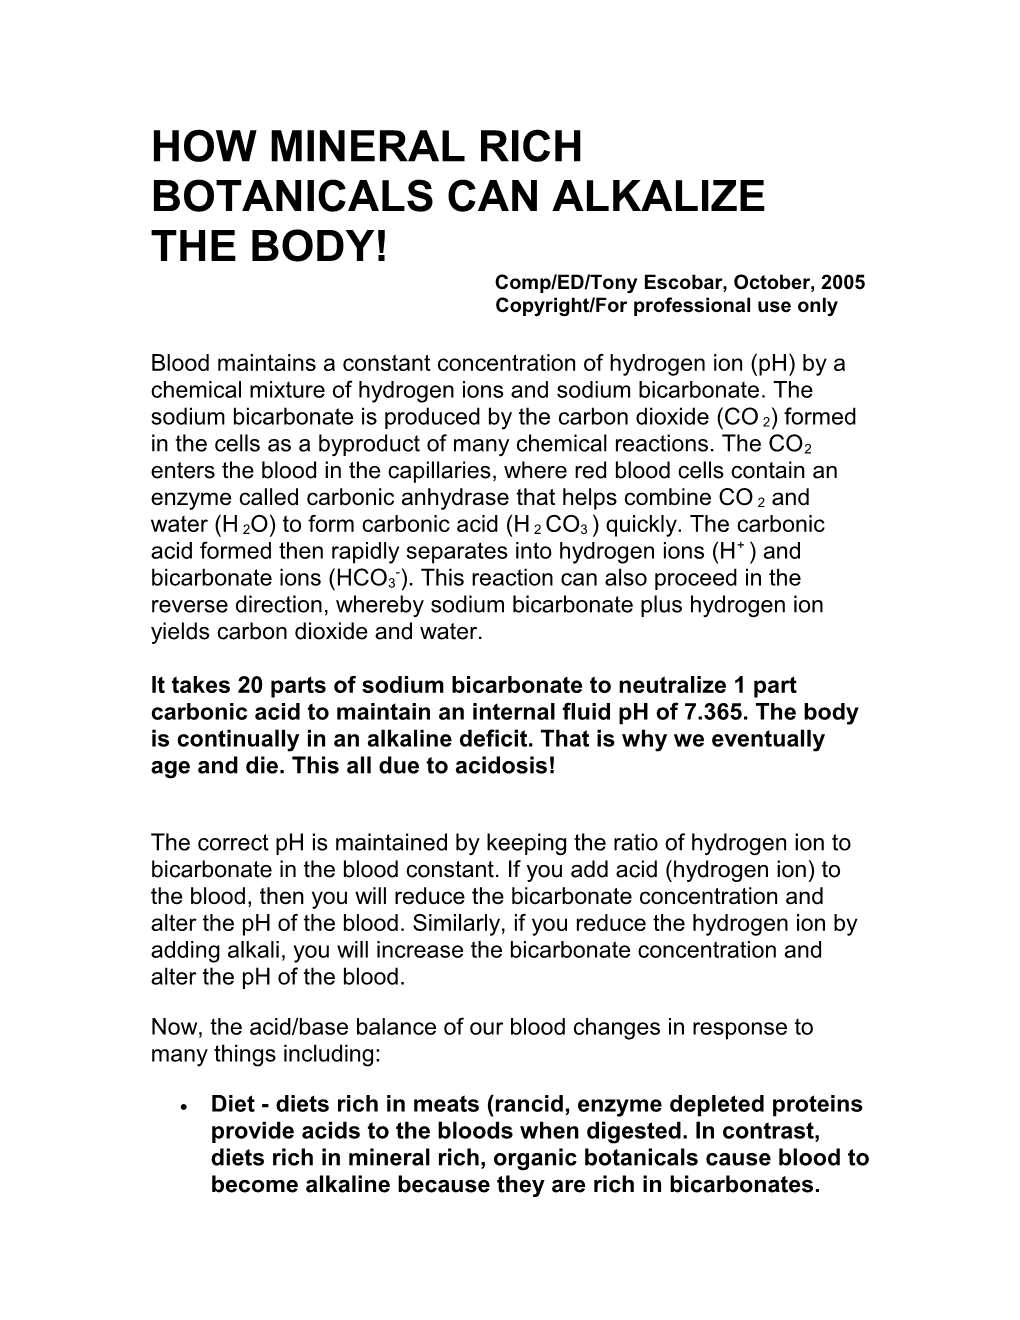 How Mineral Rich Botanicals Can Alkalize